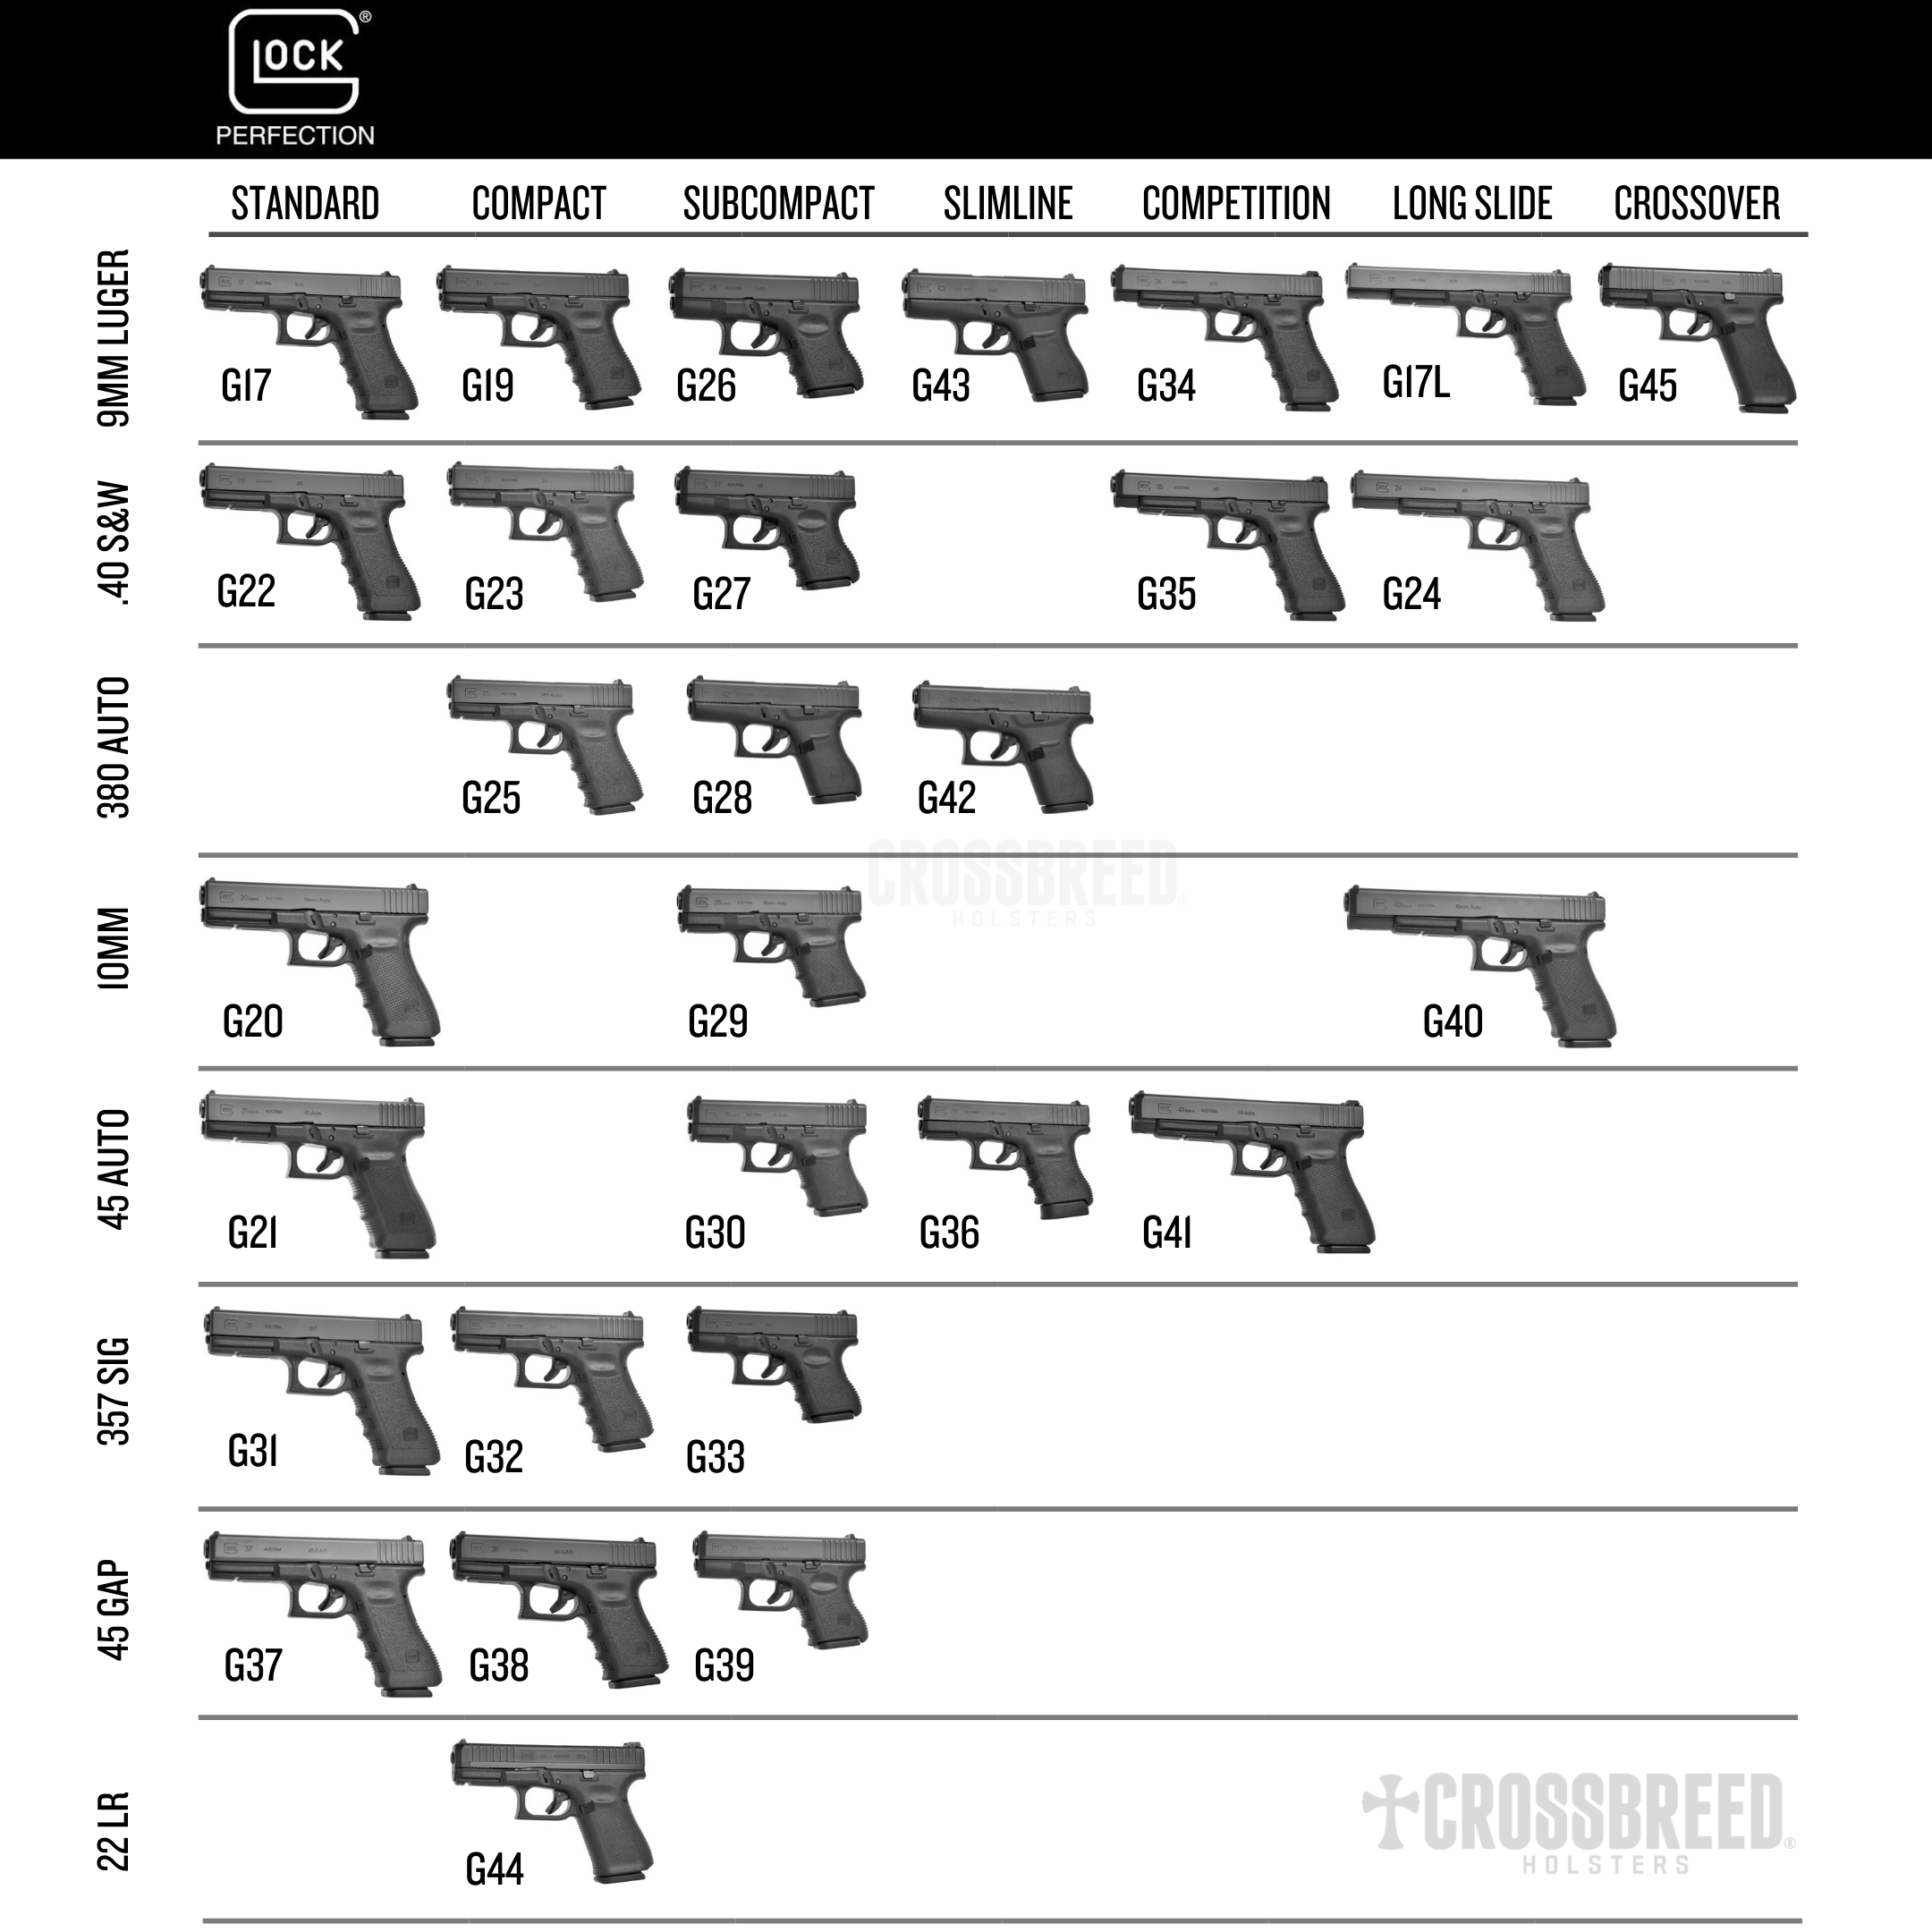 The Glock Encyclopedia Volume 2: Sizes, Models, and More!